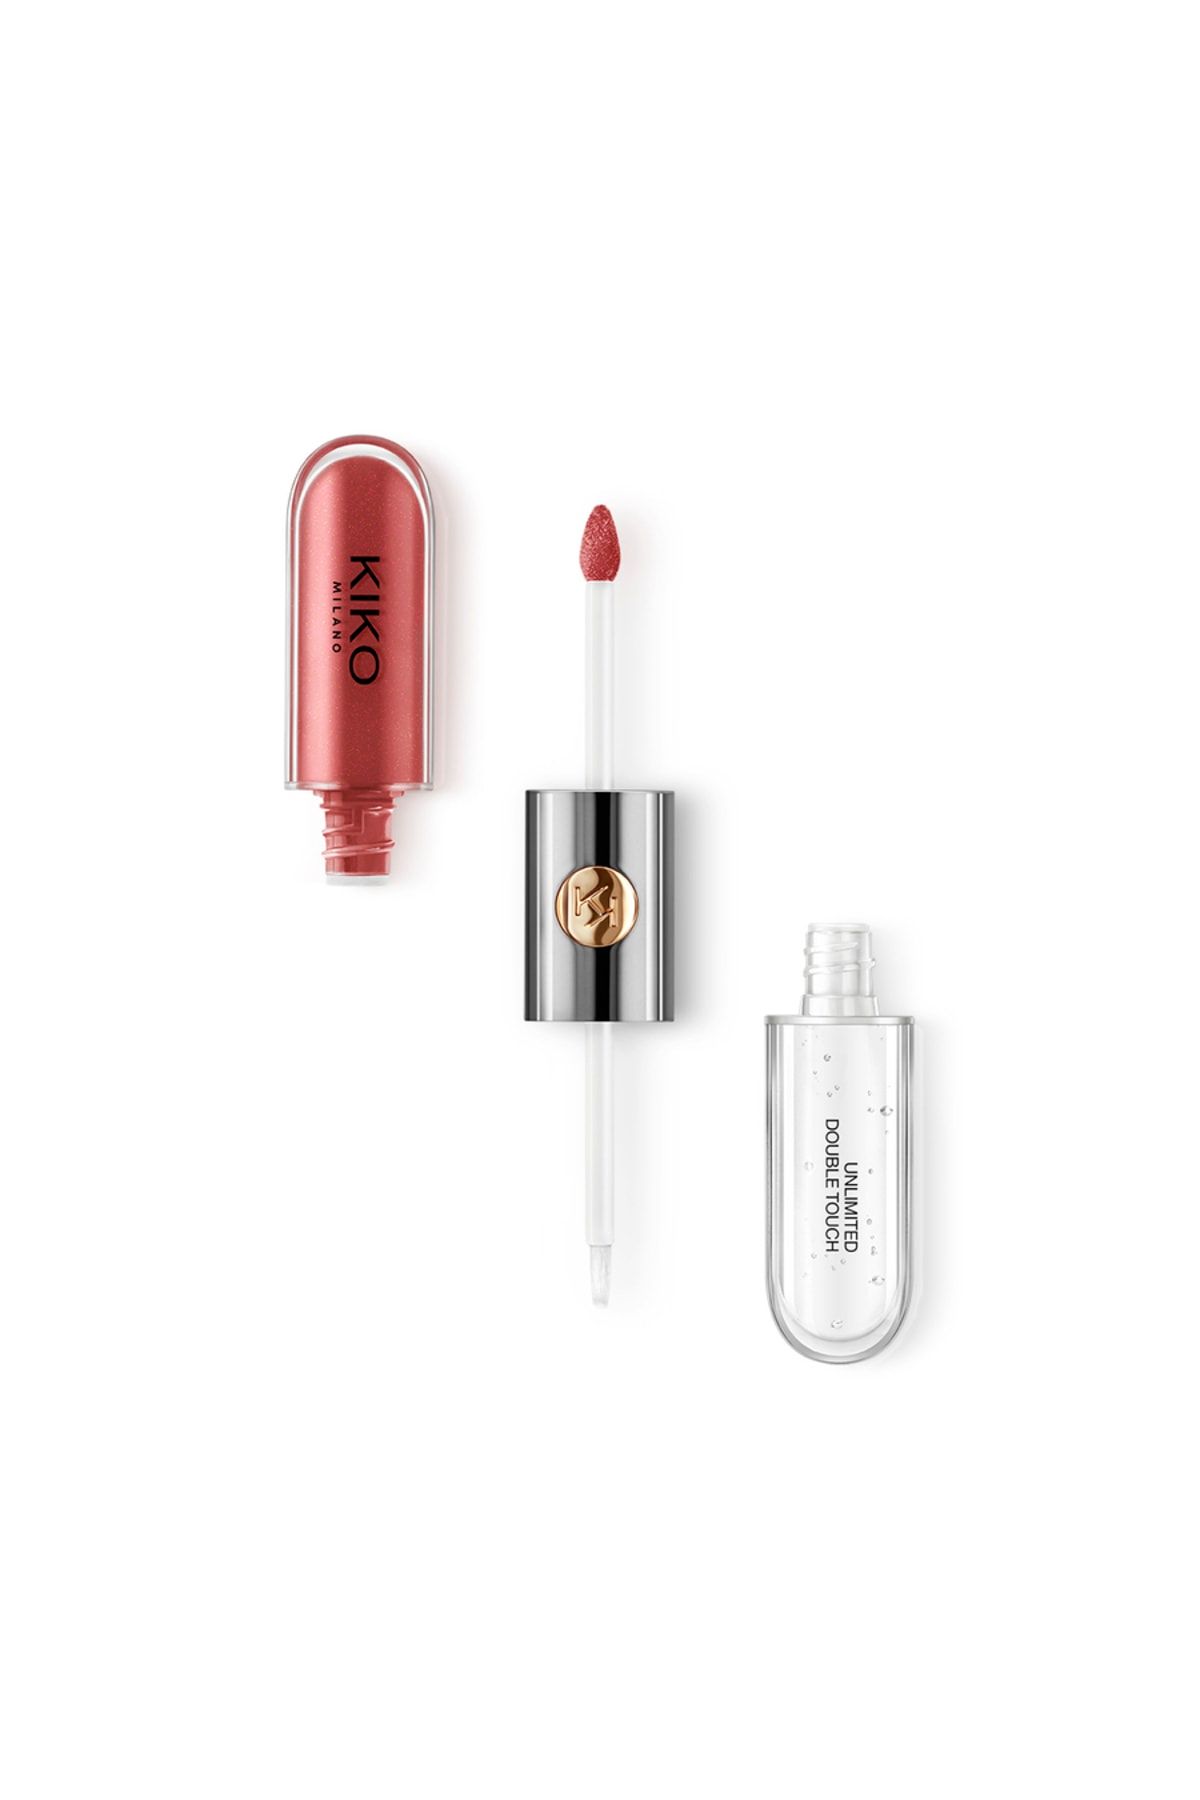 KIKO Likit Ruj - Unlimited Double Touch 108 Satin Currant Red 6 ml 8025272623360